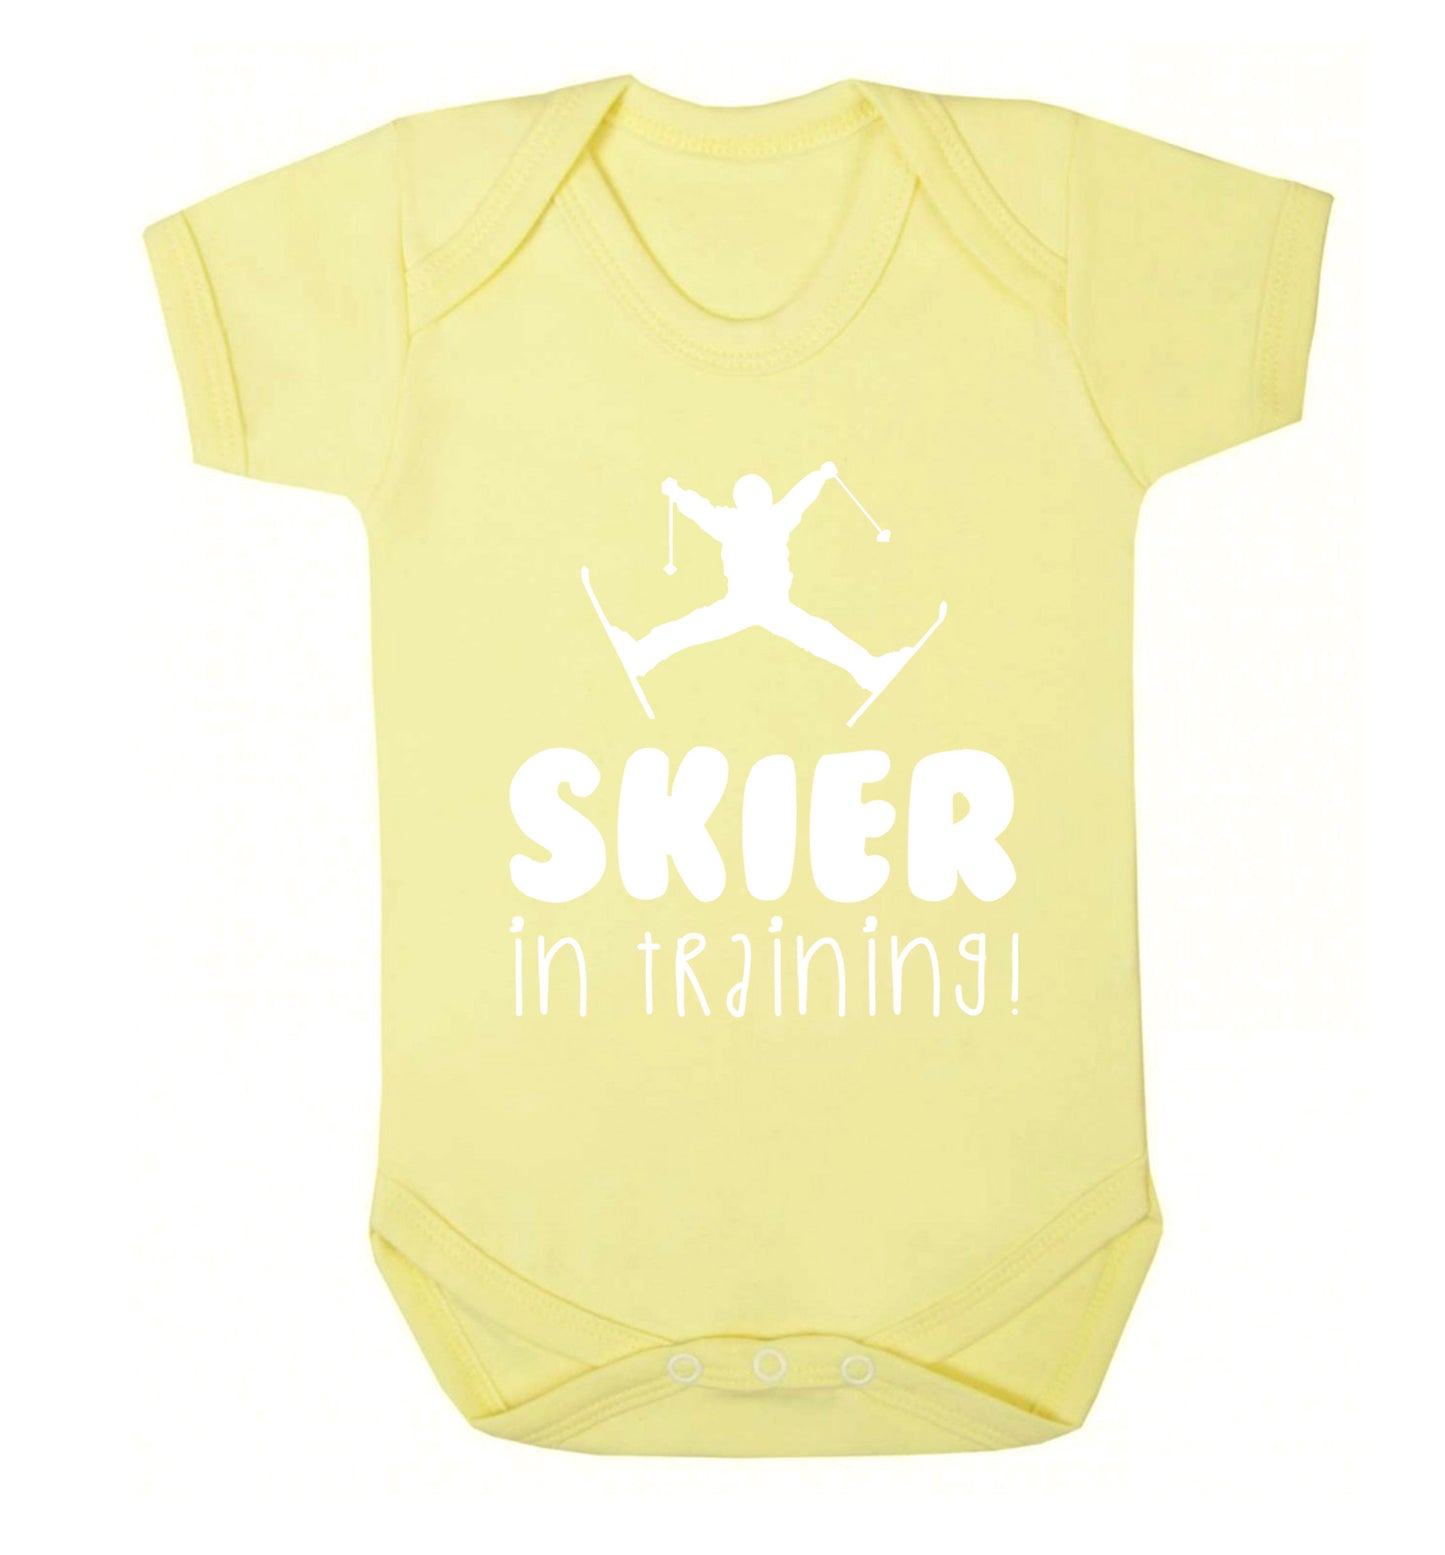 Skier in training Baby Vest pale yellow 18-24 months